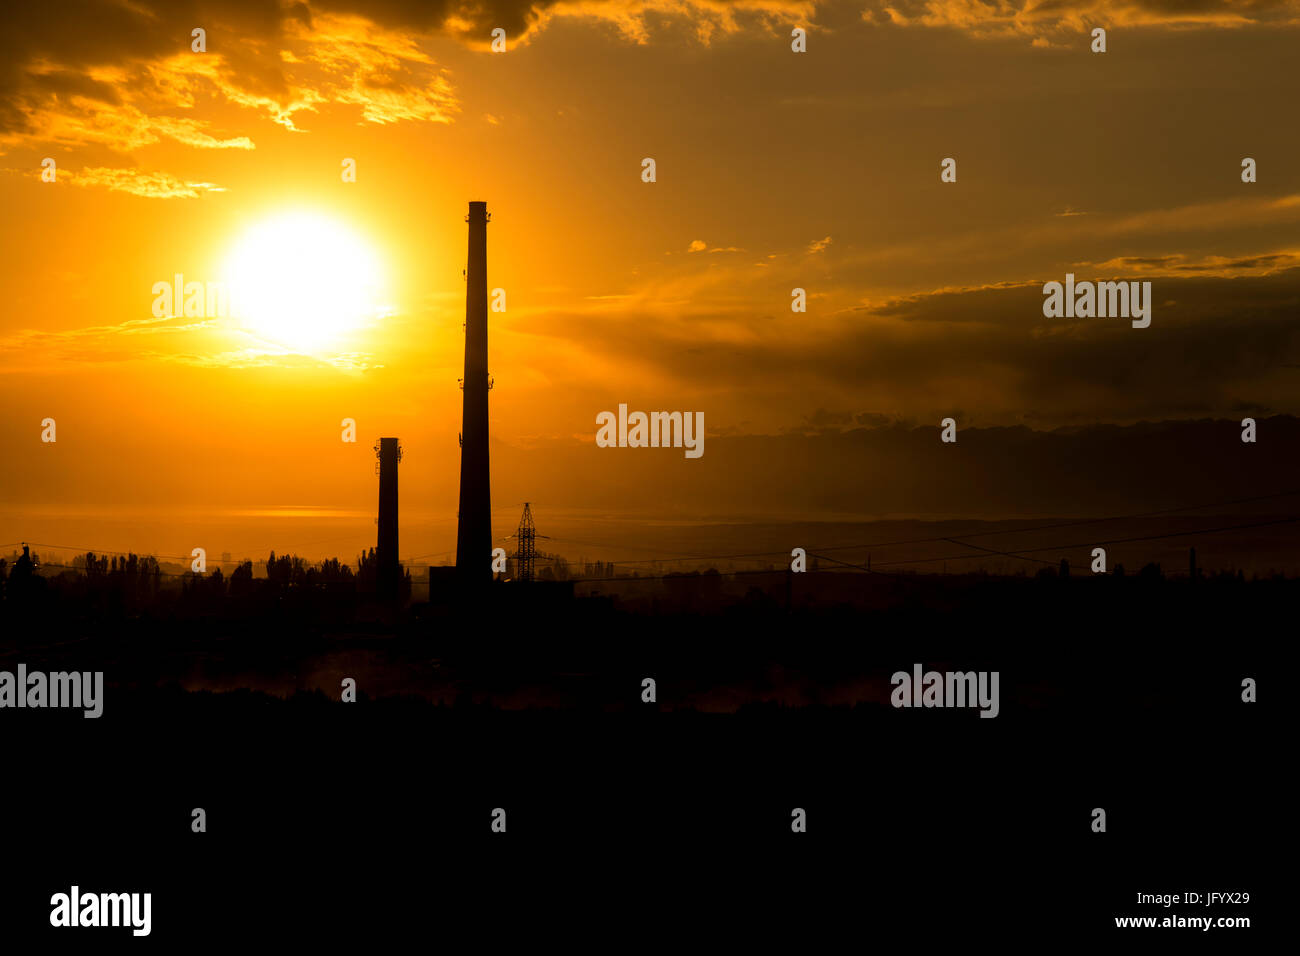 Sunset over an Industry Stock Photo